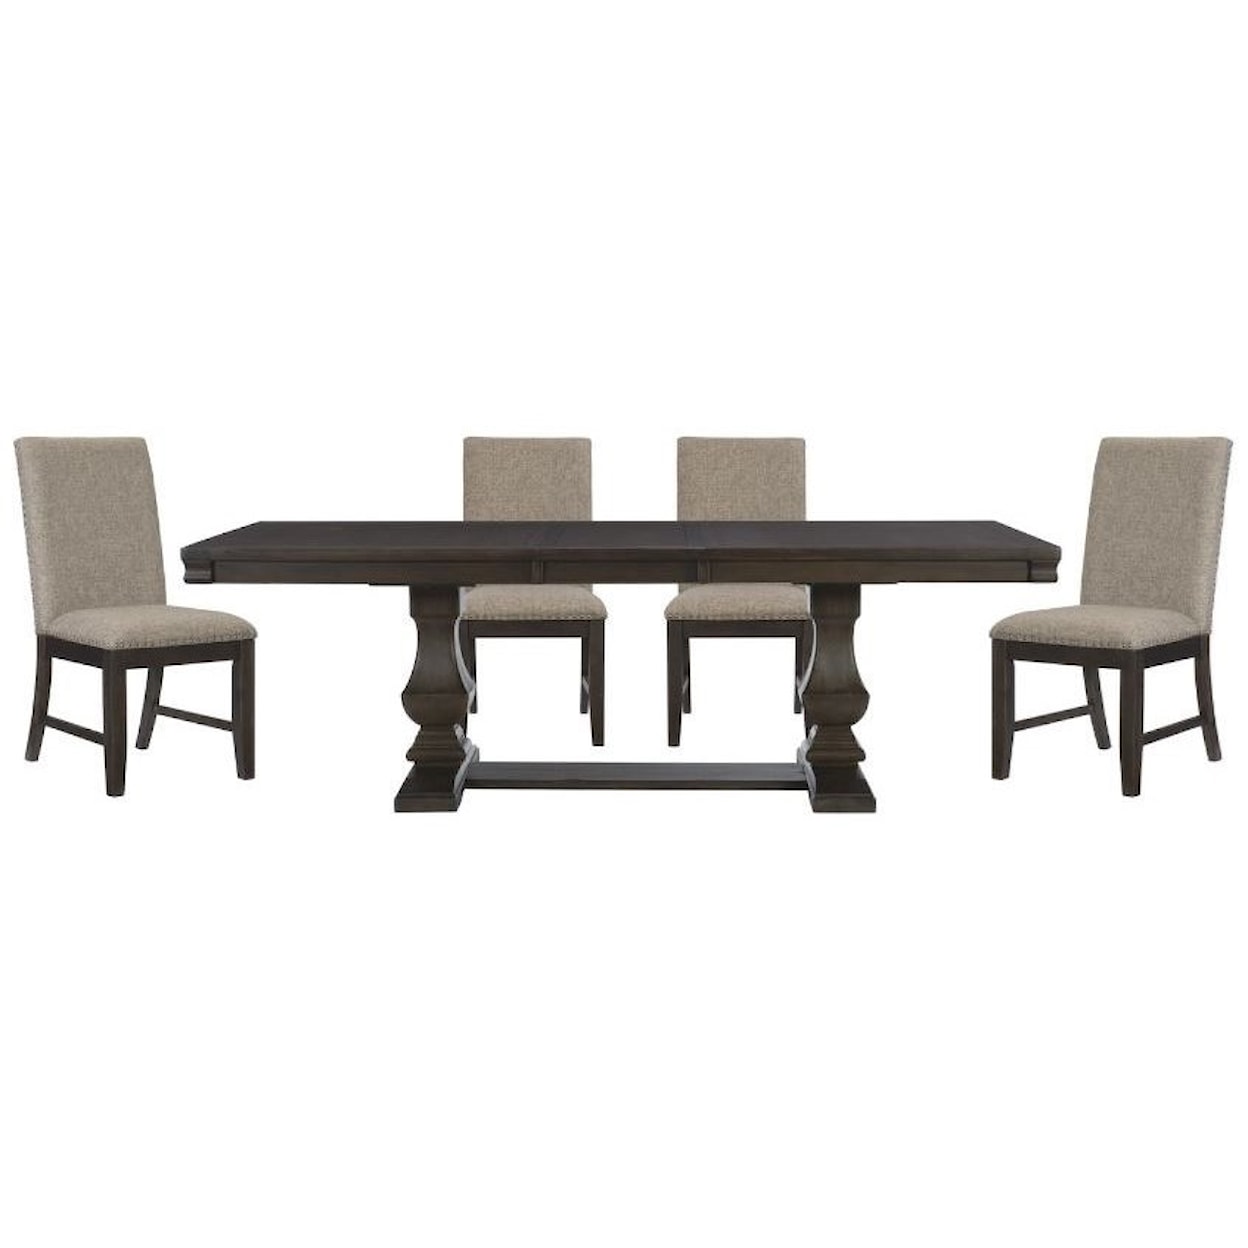 Homelegance Southlake 5-Piece Table and Chair Set